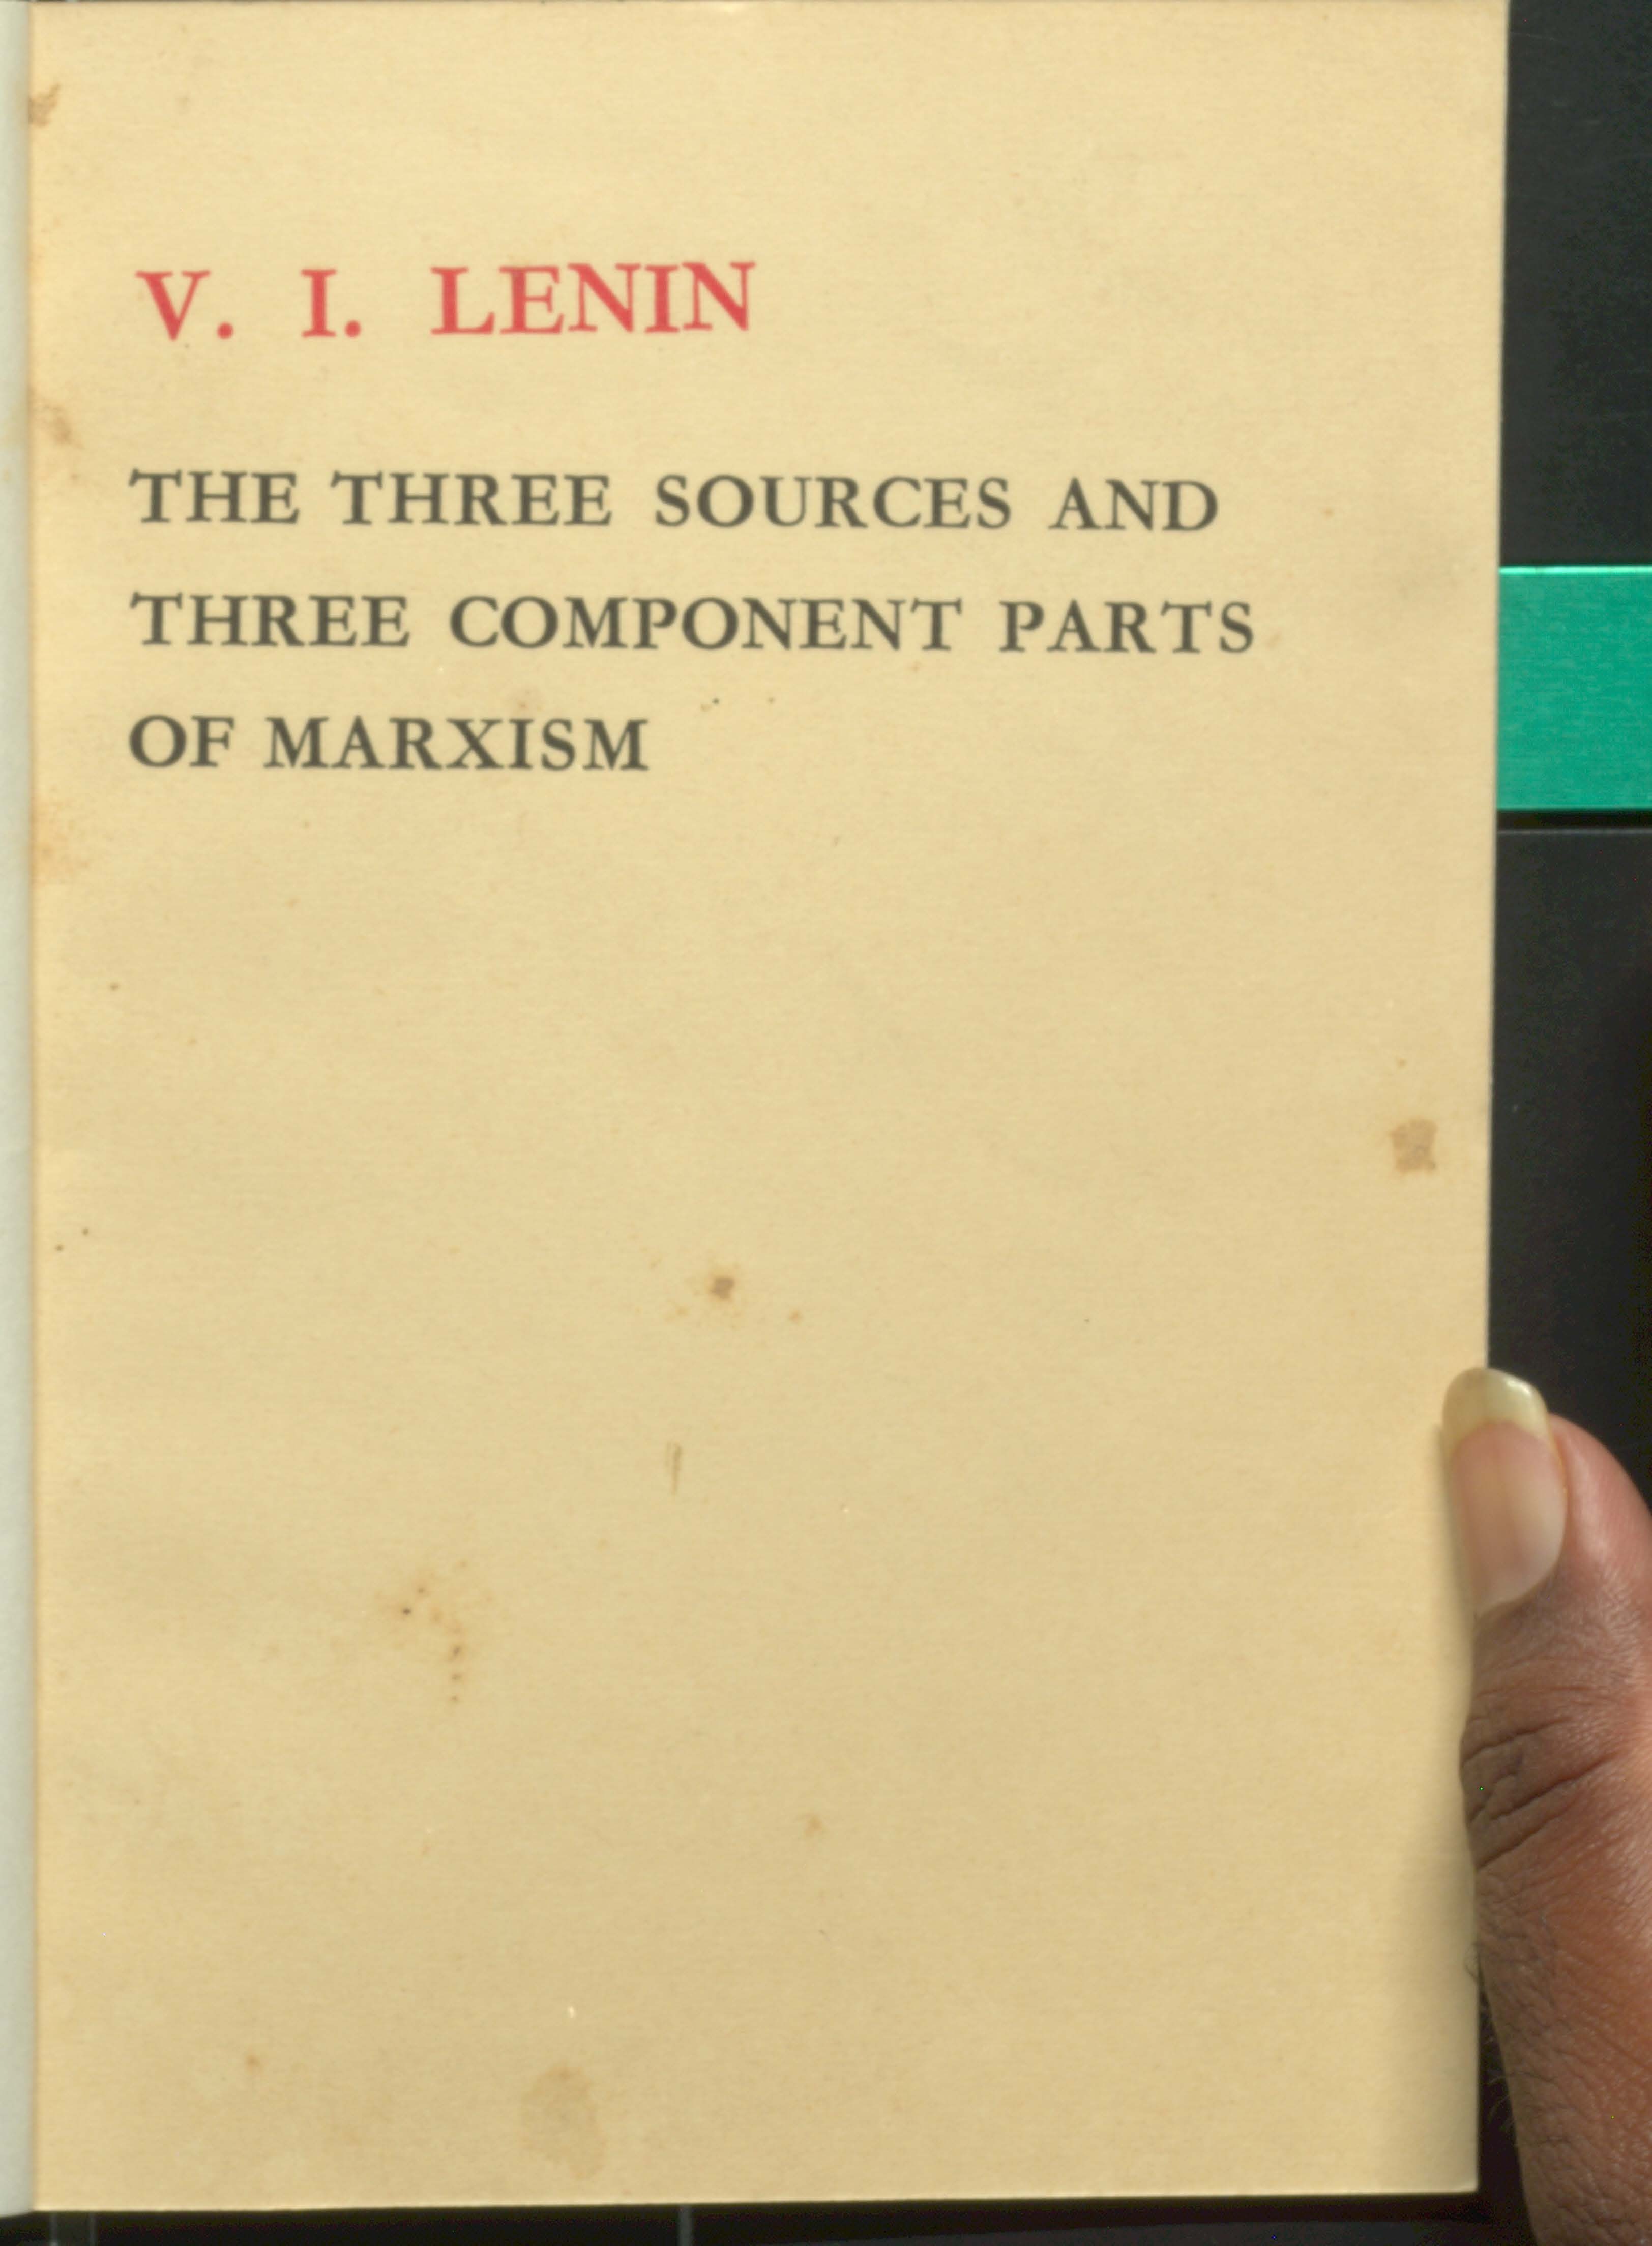 V.I Lenin The Three Sources and three Component parts of Marxism